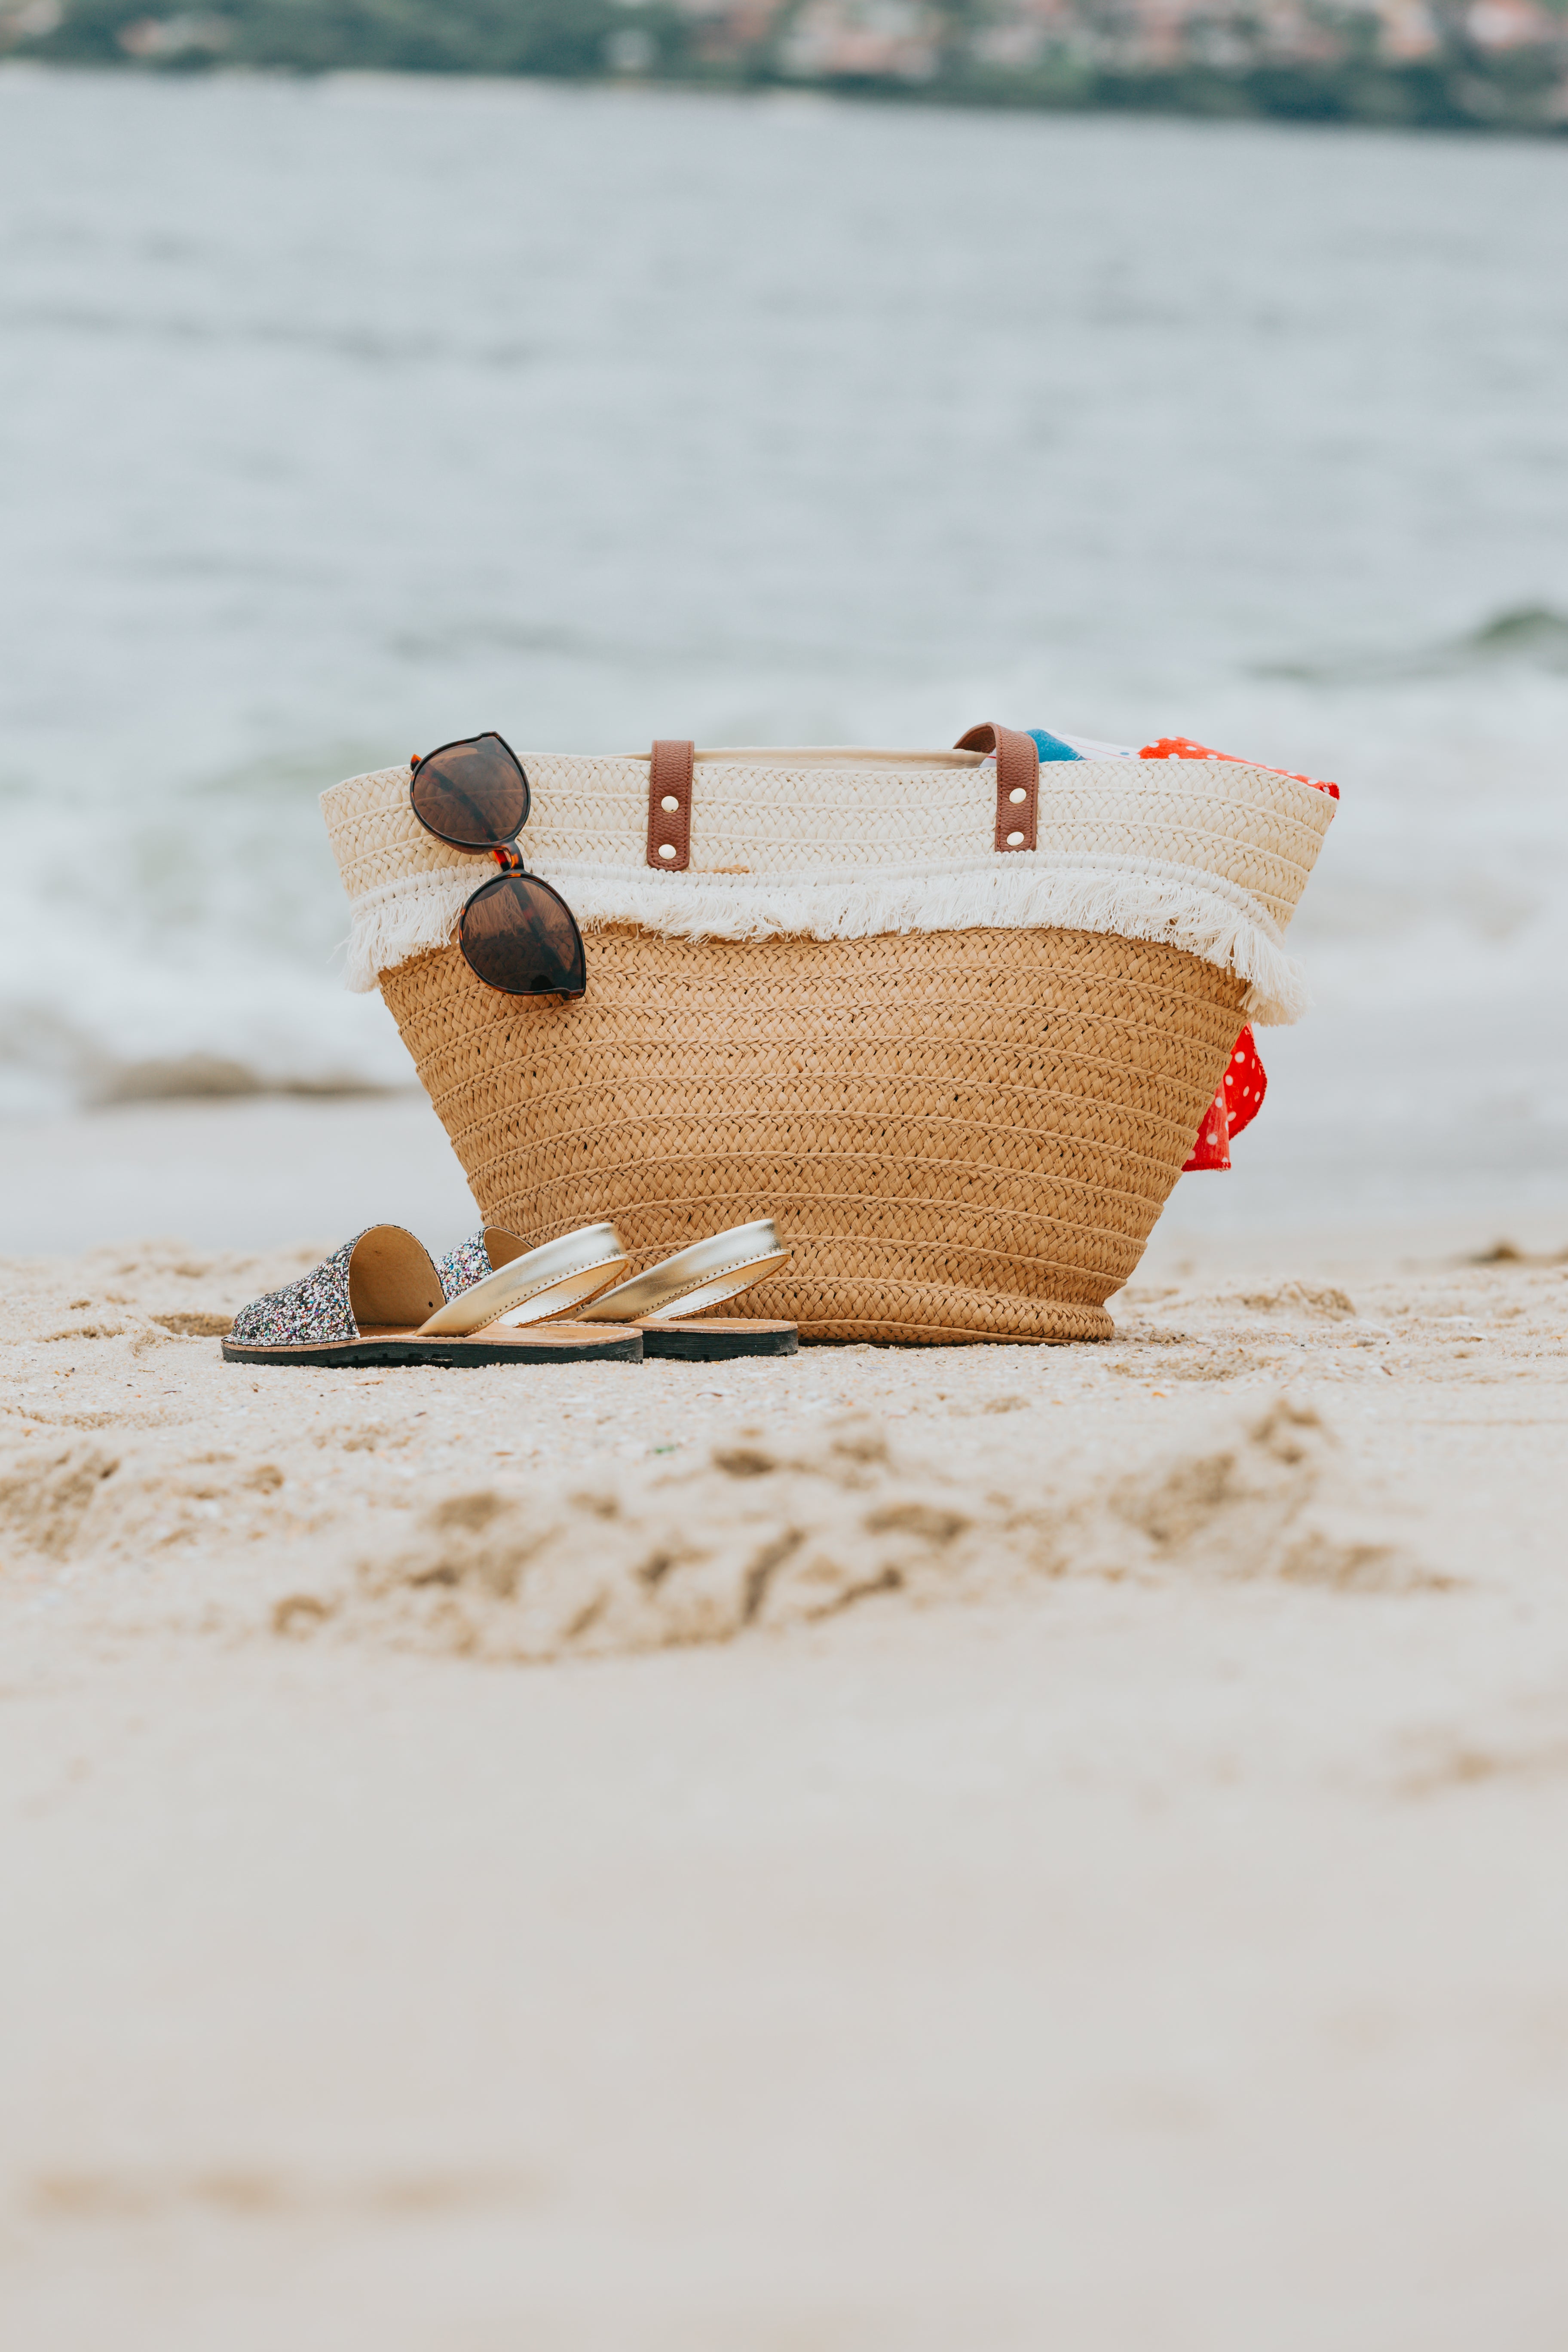 Browse Free HD Images of Wicker Beach Bag And Sandals On A White Sandy Beach